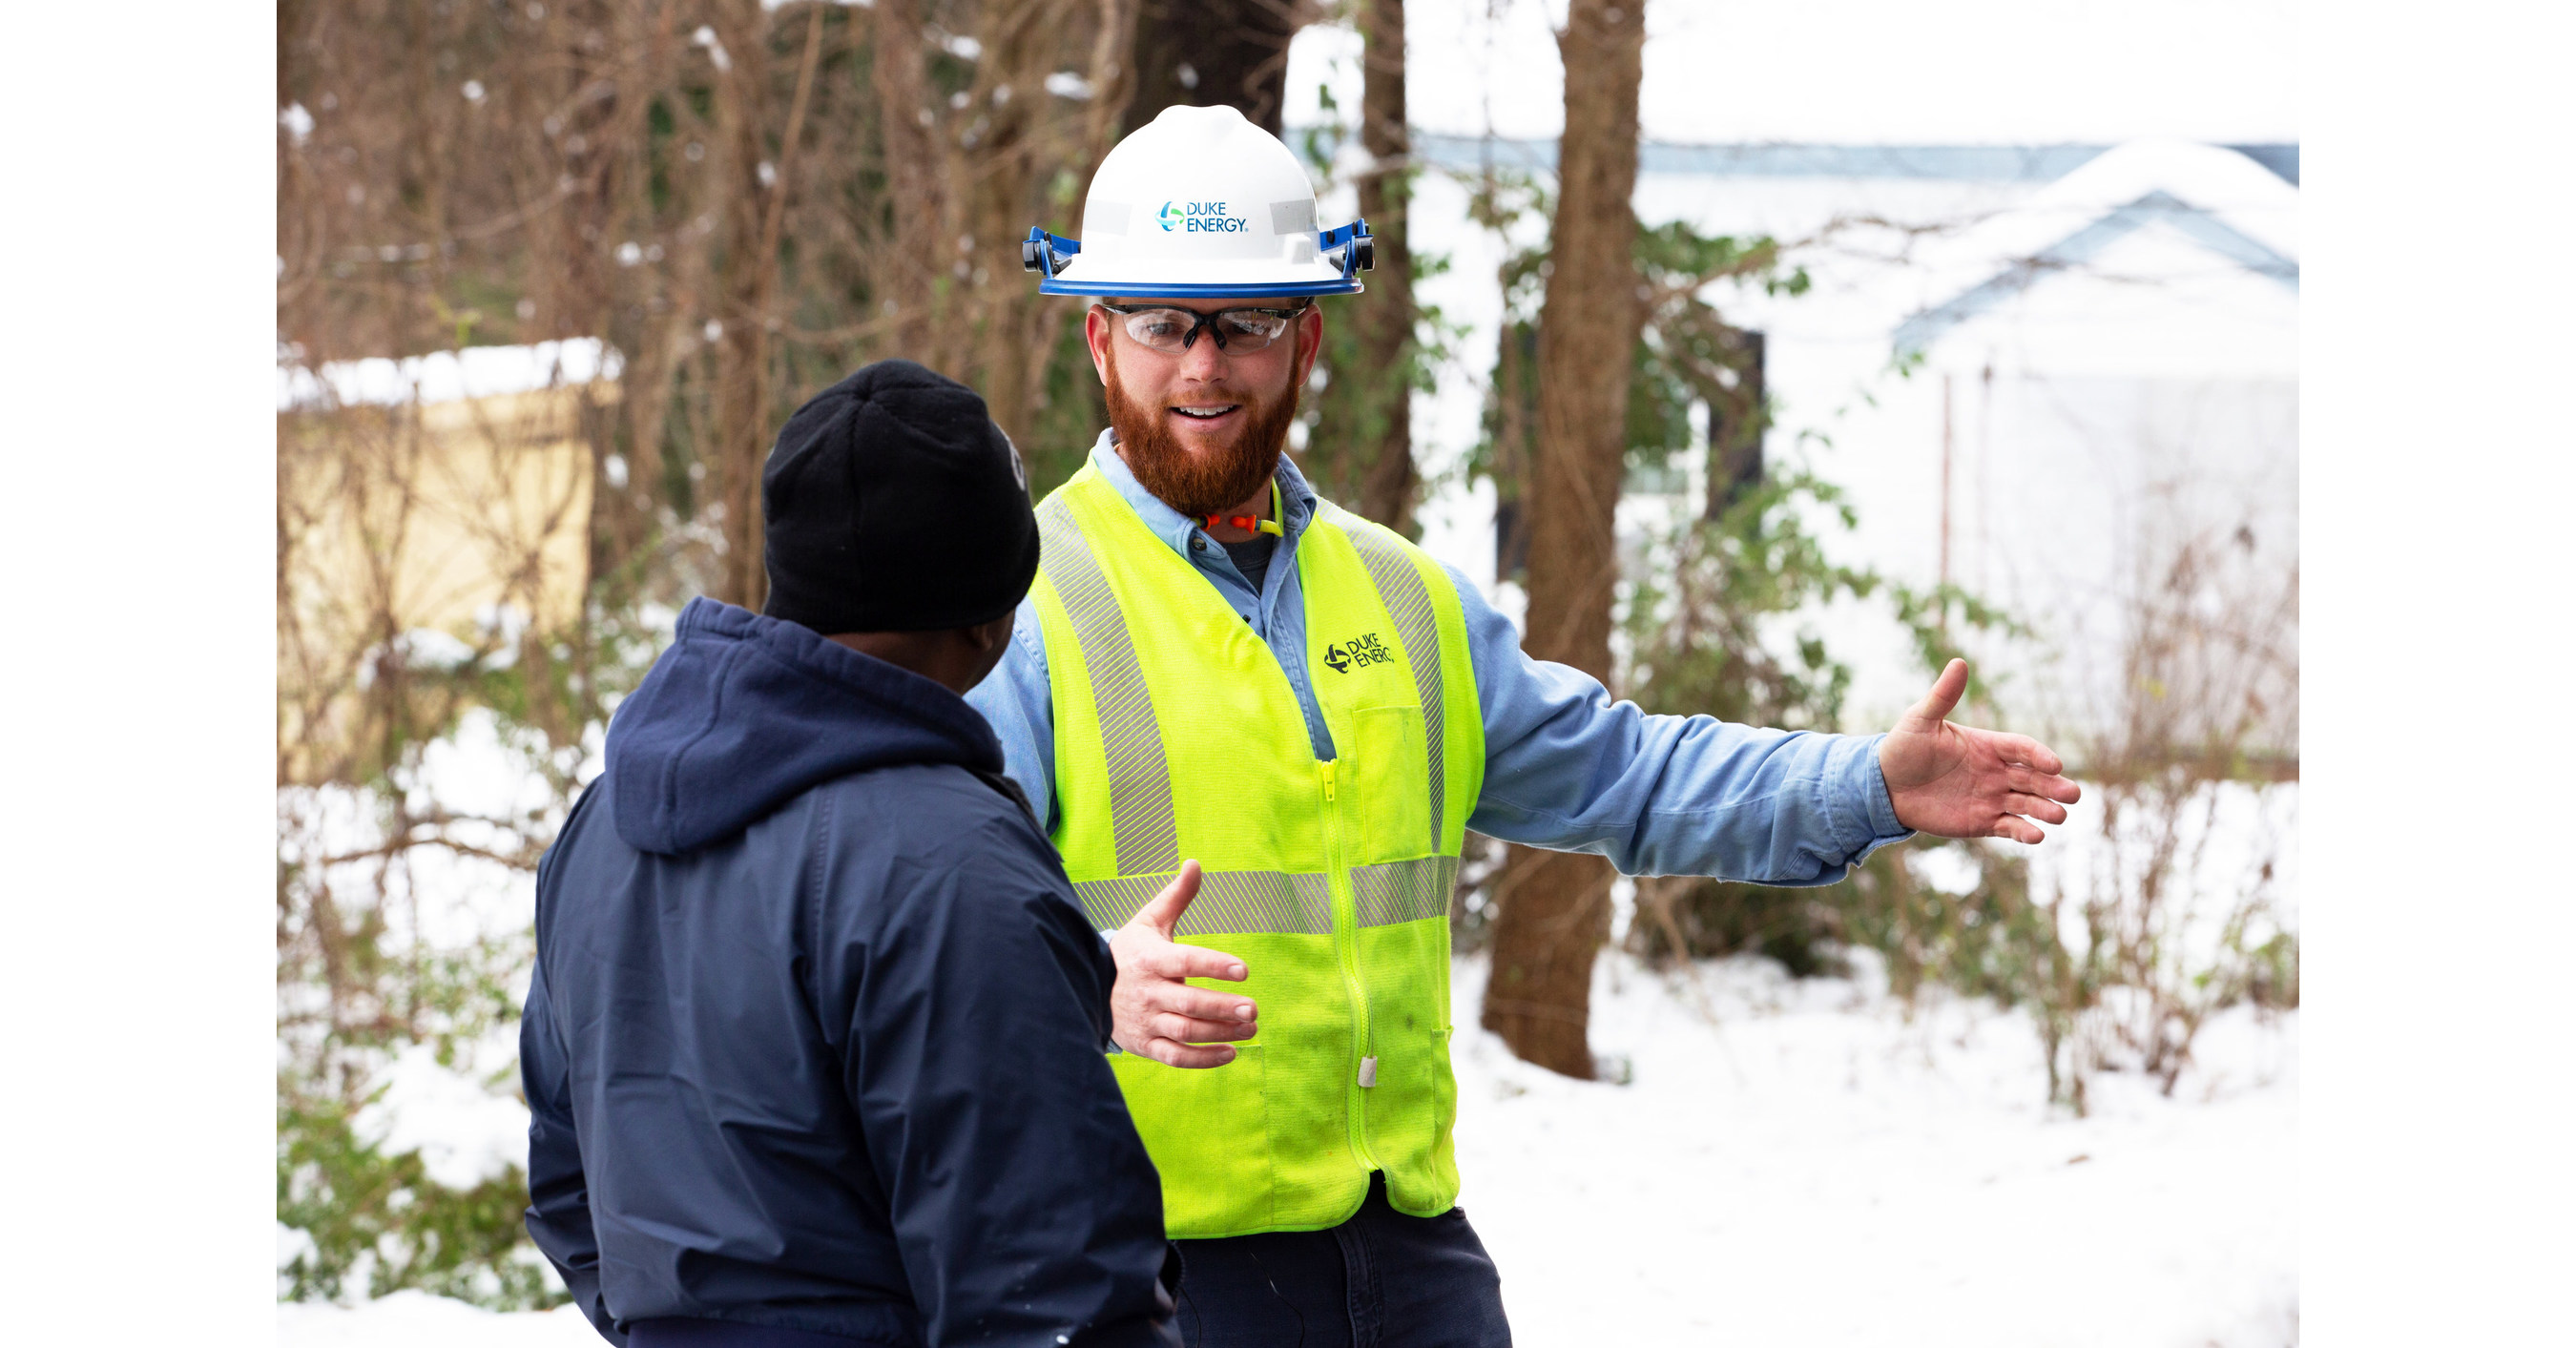 duke-energy-restores-685-000-power-outages-in-the-carolinas-45-000